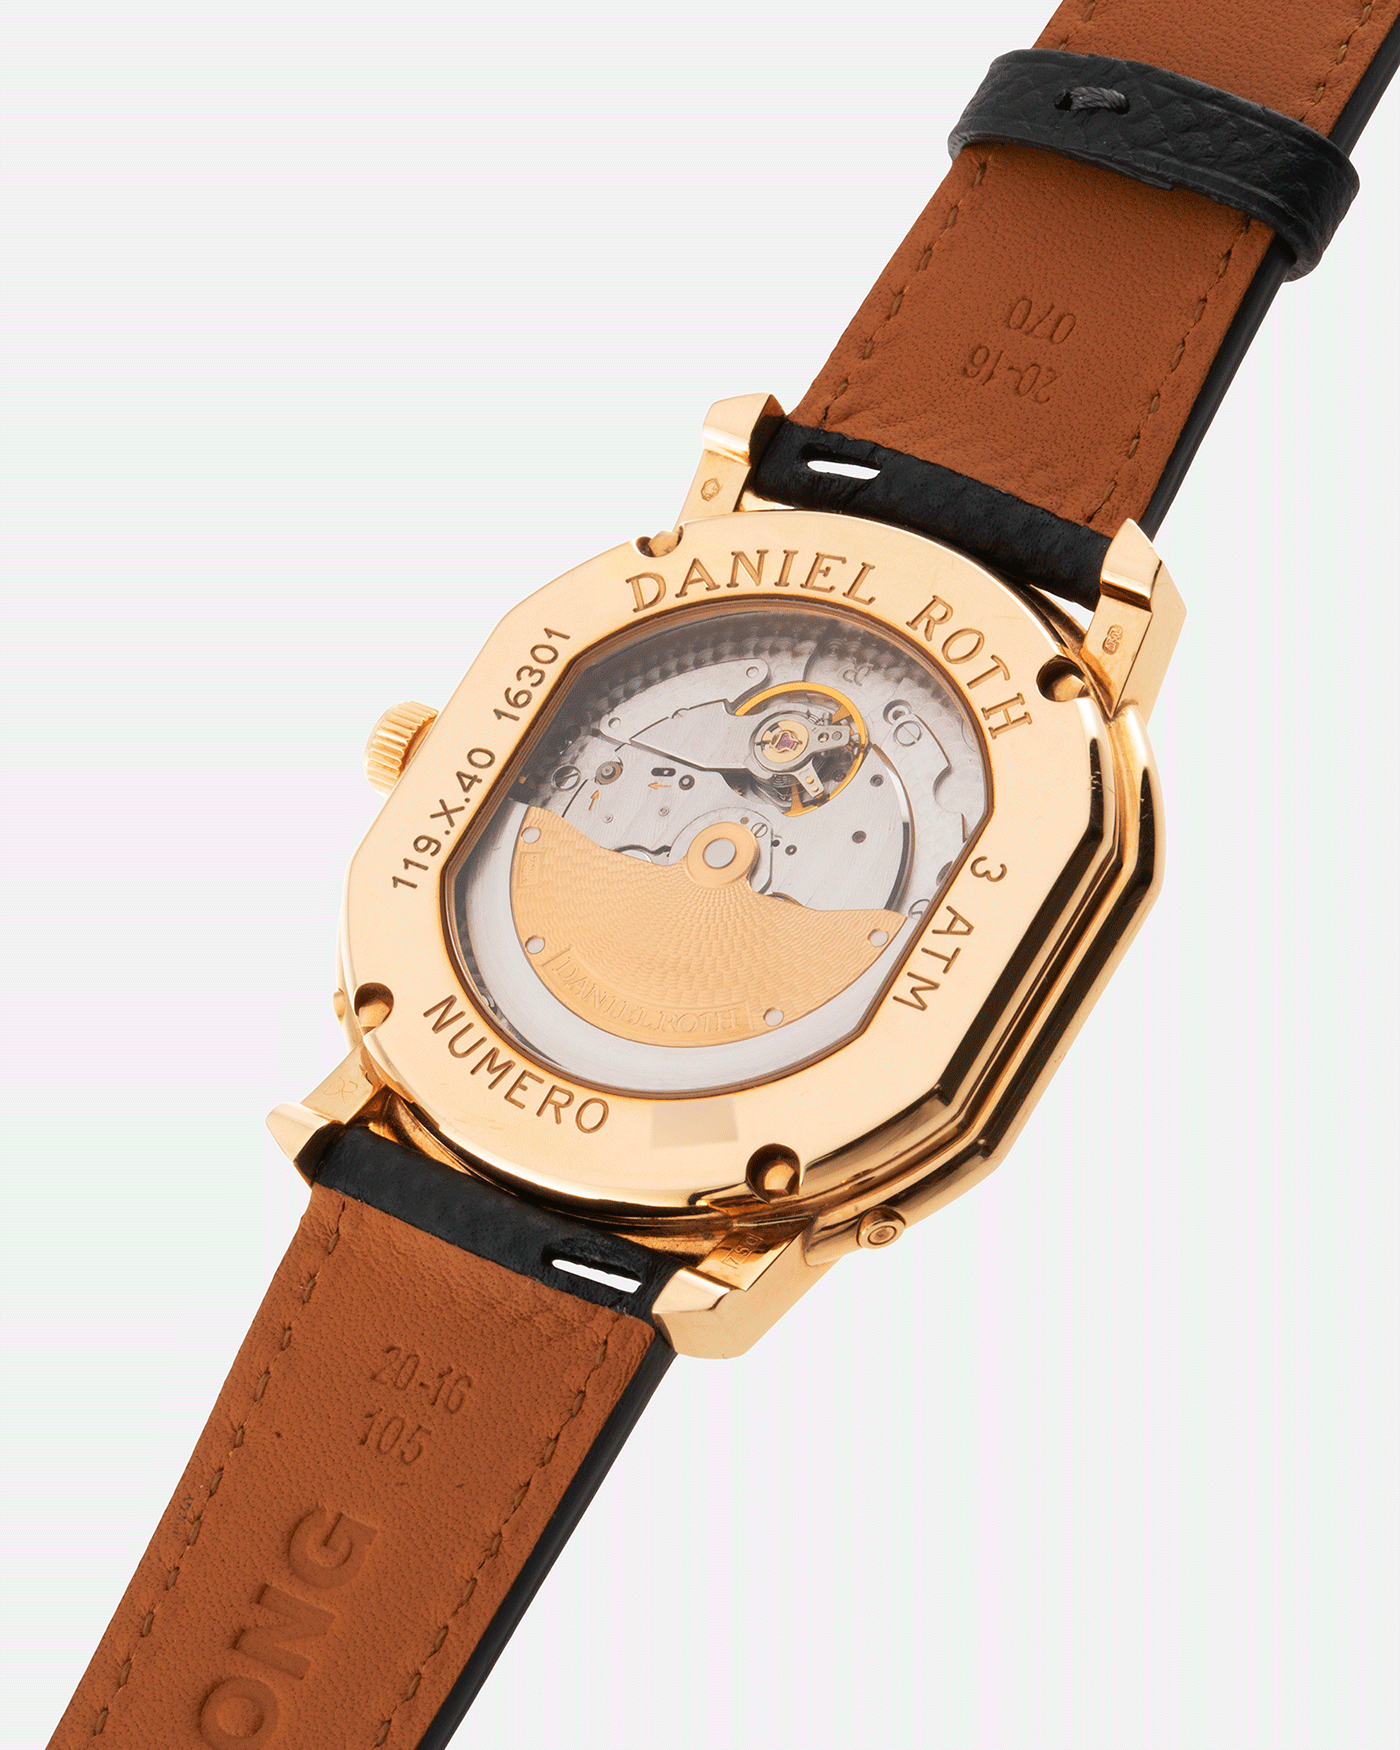 vBrand: Daniel Roth Year: 1990’s Model: 119X40 Perpetual Calendar Skeleton Movement: Heavily Modified Lemania 8810 Material: 18k Yellow Gold Case Diameter: 38mmX41mm Bracelet/Strap: Molequin Anthracite Grained Calf with 18k Yellow Gold Tang Buckle